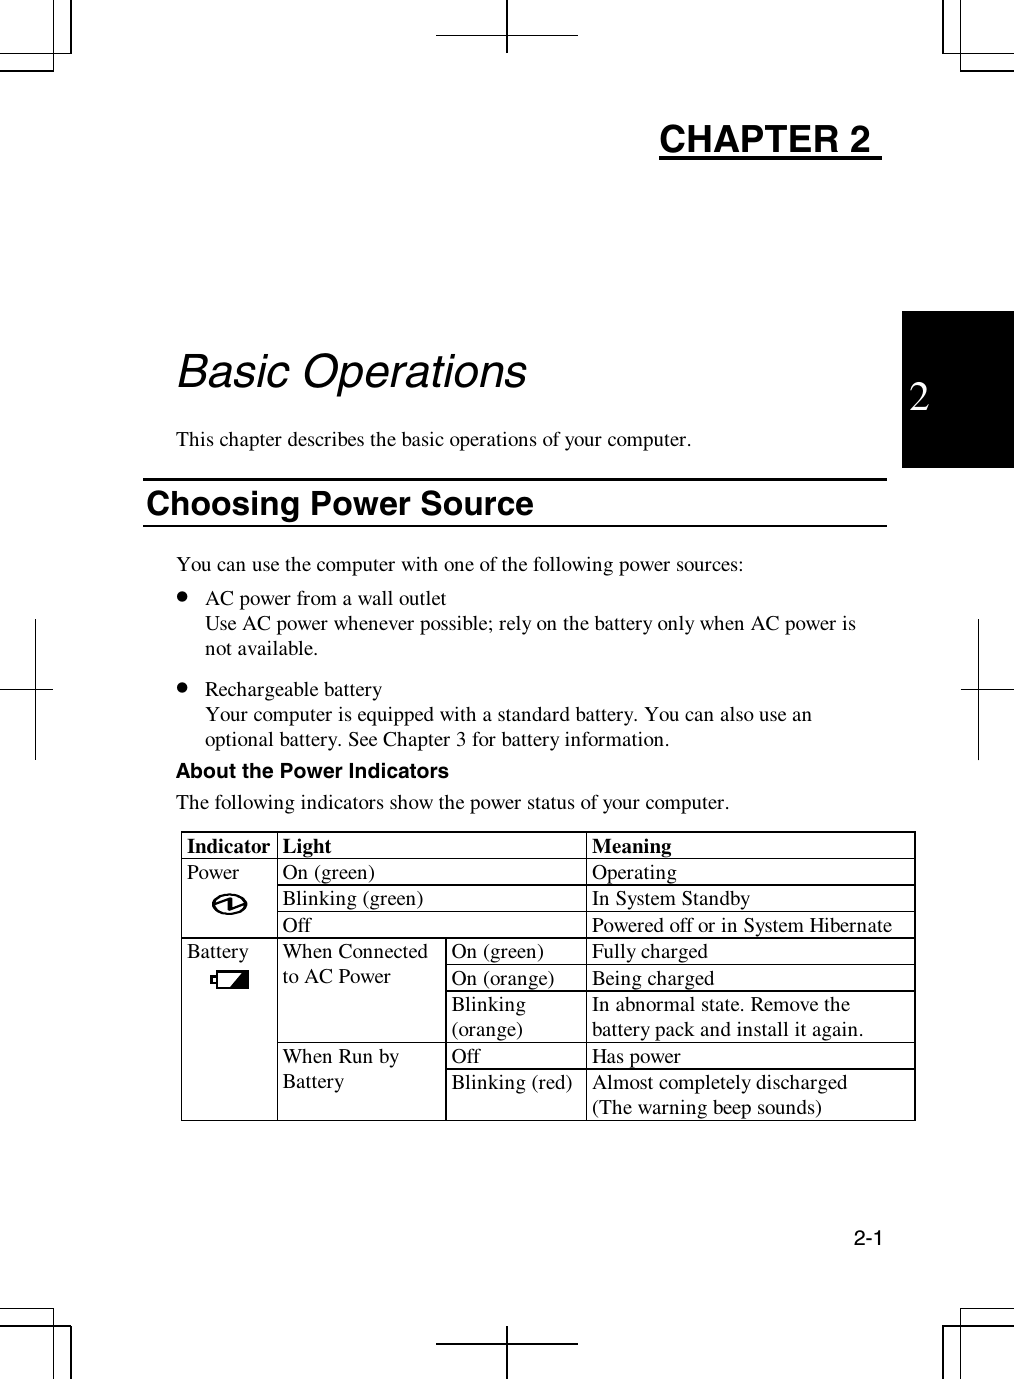 2-12CHAPTER 2Basic OperationsThis chapter describes the basic operations of your computer.Choosing Power SourceYou can use the computer with one of the following power sources:•  AC power from a wall outletUse AC power whenever possible; rely on the battery only when AC power isnot available.•  Rechargeable batteryYour computer is equipped with a standard battery. You can also use anoptional battery. See Chapter 3 for battery information.About the Power IndicatorsThe following indicators show the power status of your computer.Indicator Light MeaningPower On (green) OperatingBlinking (green) In System StandbyOff Powered off or in System HibernateBattery On (green) Fully chargedOn (orange) Being chargedWhen Connectedto AC PowerBlinking(orange) In abnormal state. Remove thebattery pack and install it again.Off Has powerWhen Run byBattery Blinking (red) Almost completely discharged(The warning beep sounds)